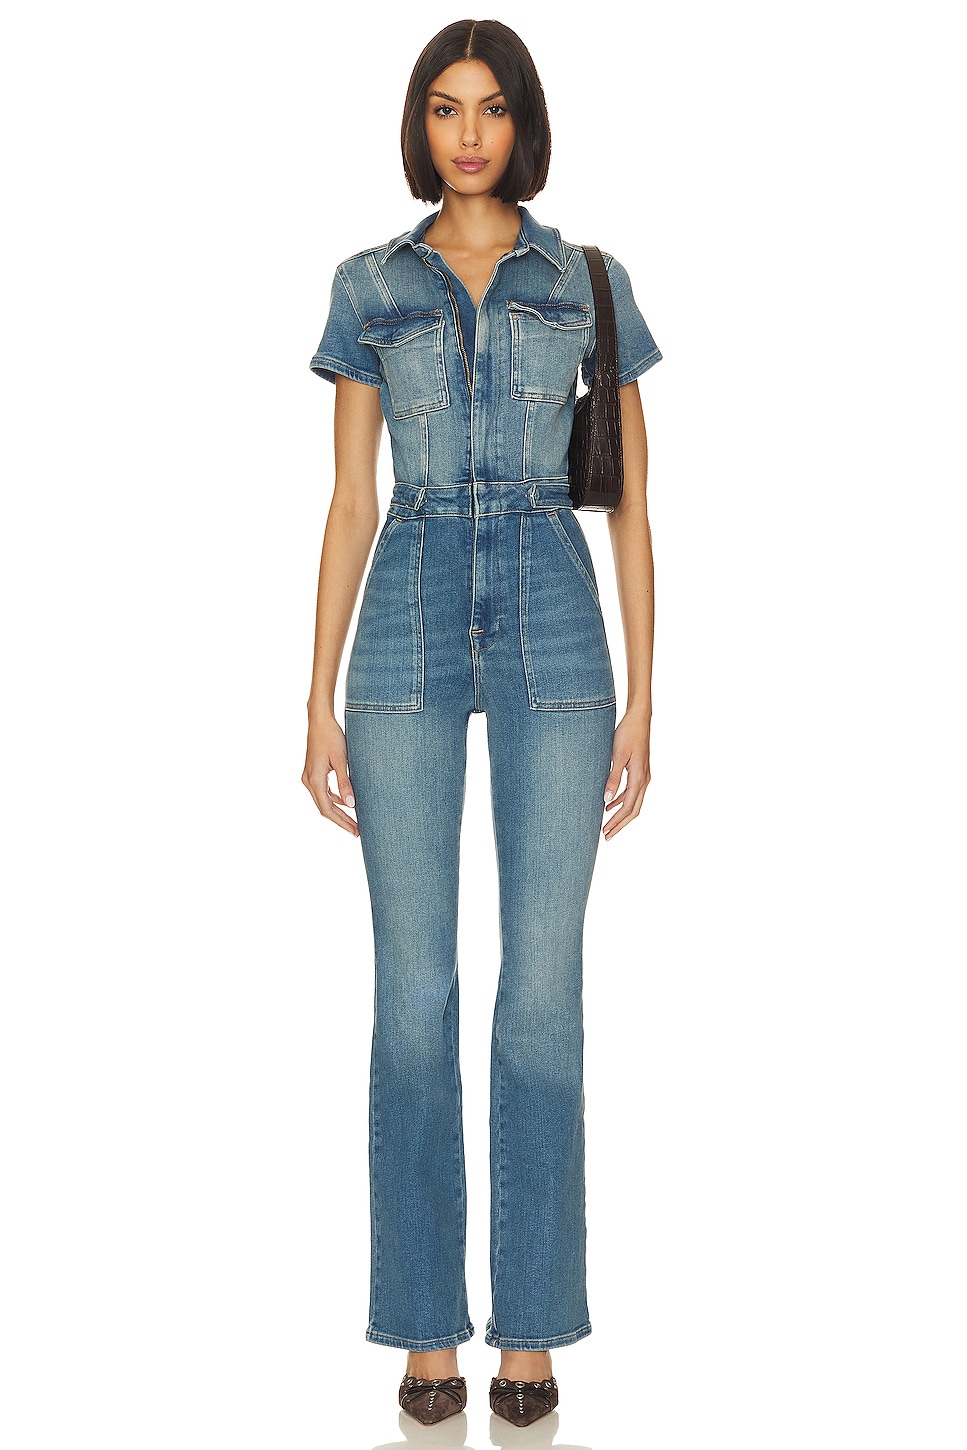 Good American Fit For Success Bootcut Jumpsuit in Blue Denim